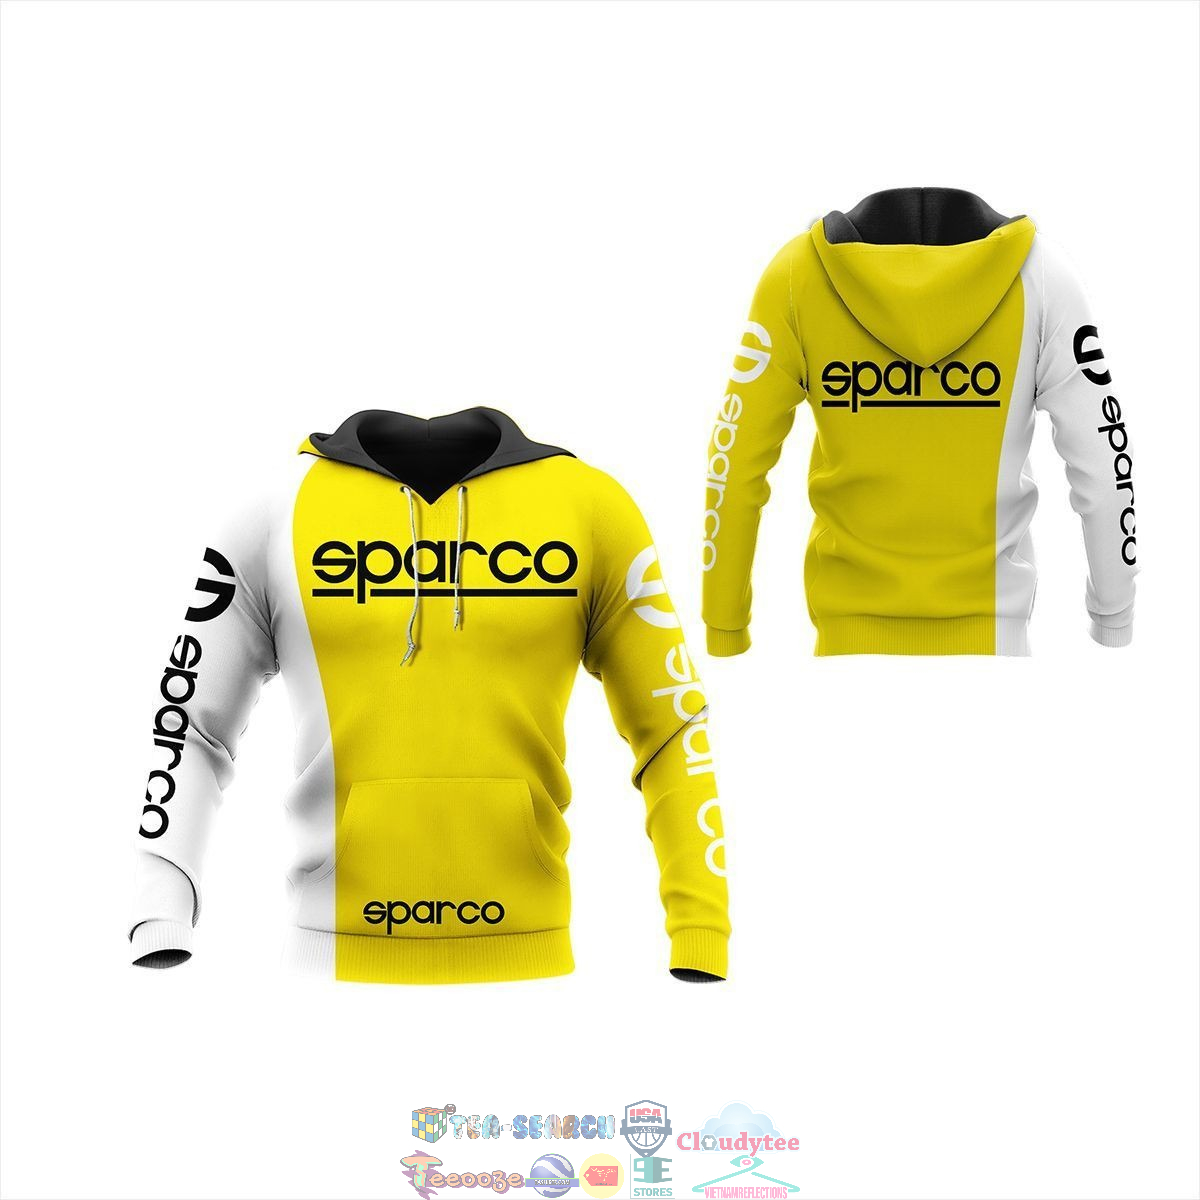 Sparco ver 13 3D hoodie and t-shirt